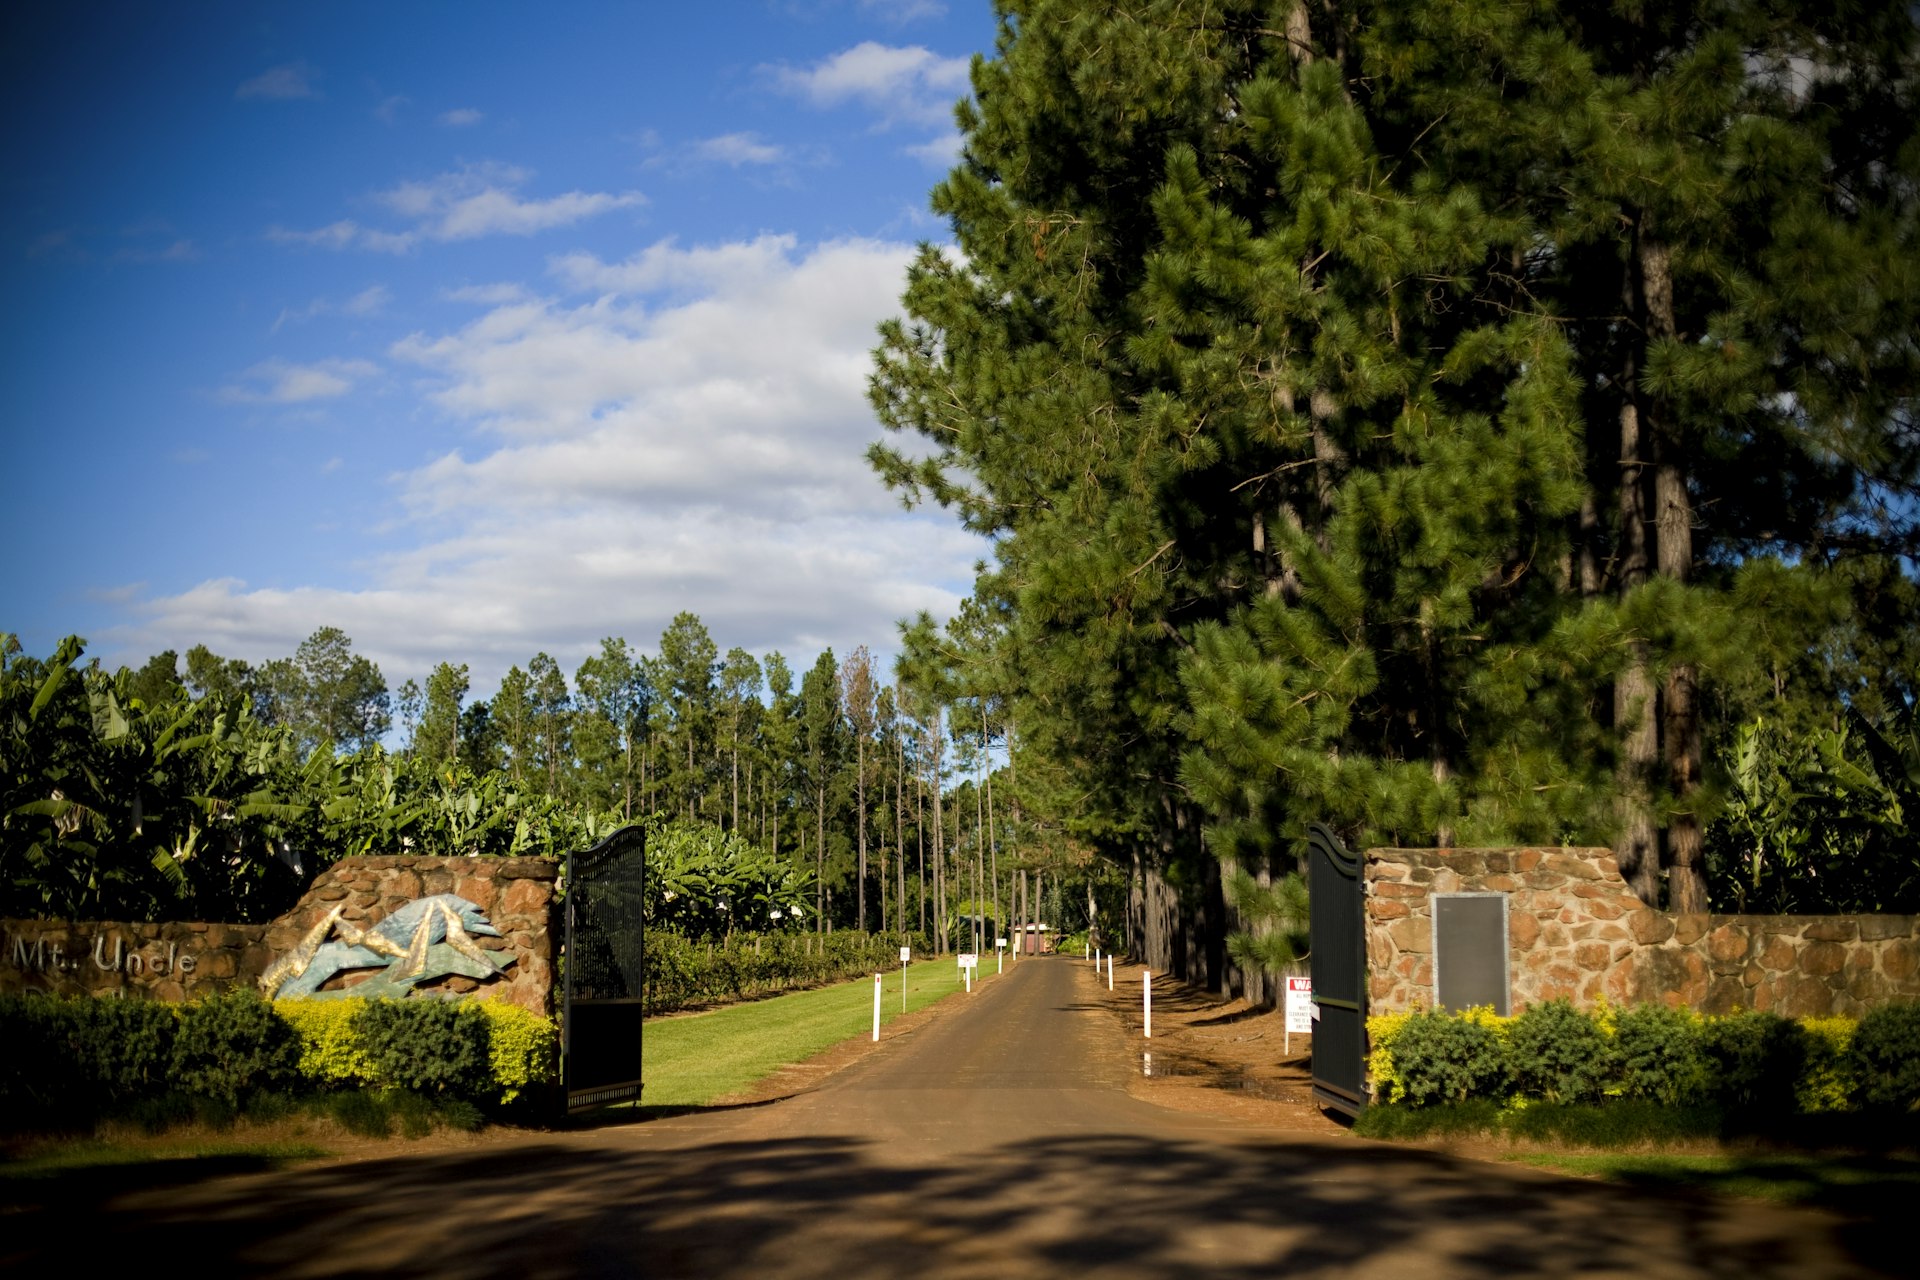 Entrance to the grounds to Mt Uncle Distillery with their banana plantation on the left © Image care of Mt Uncle Distillery